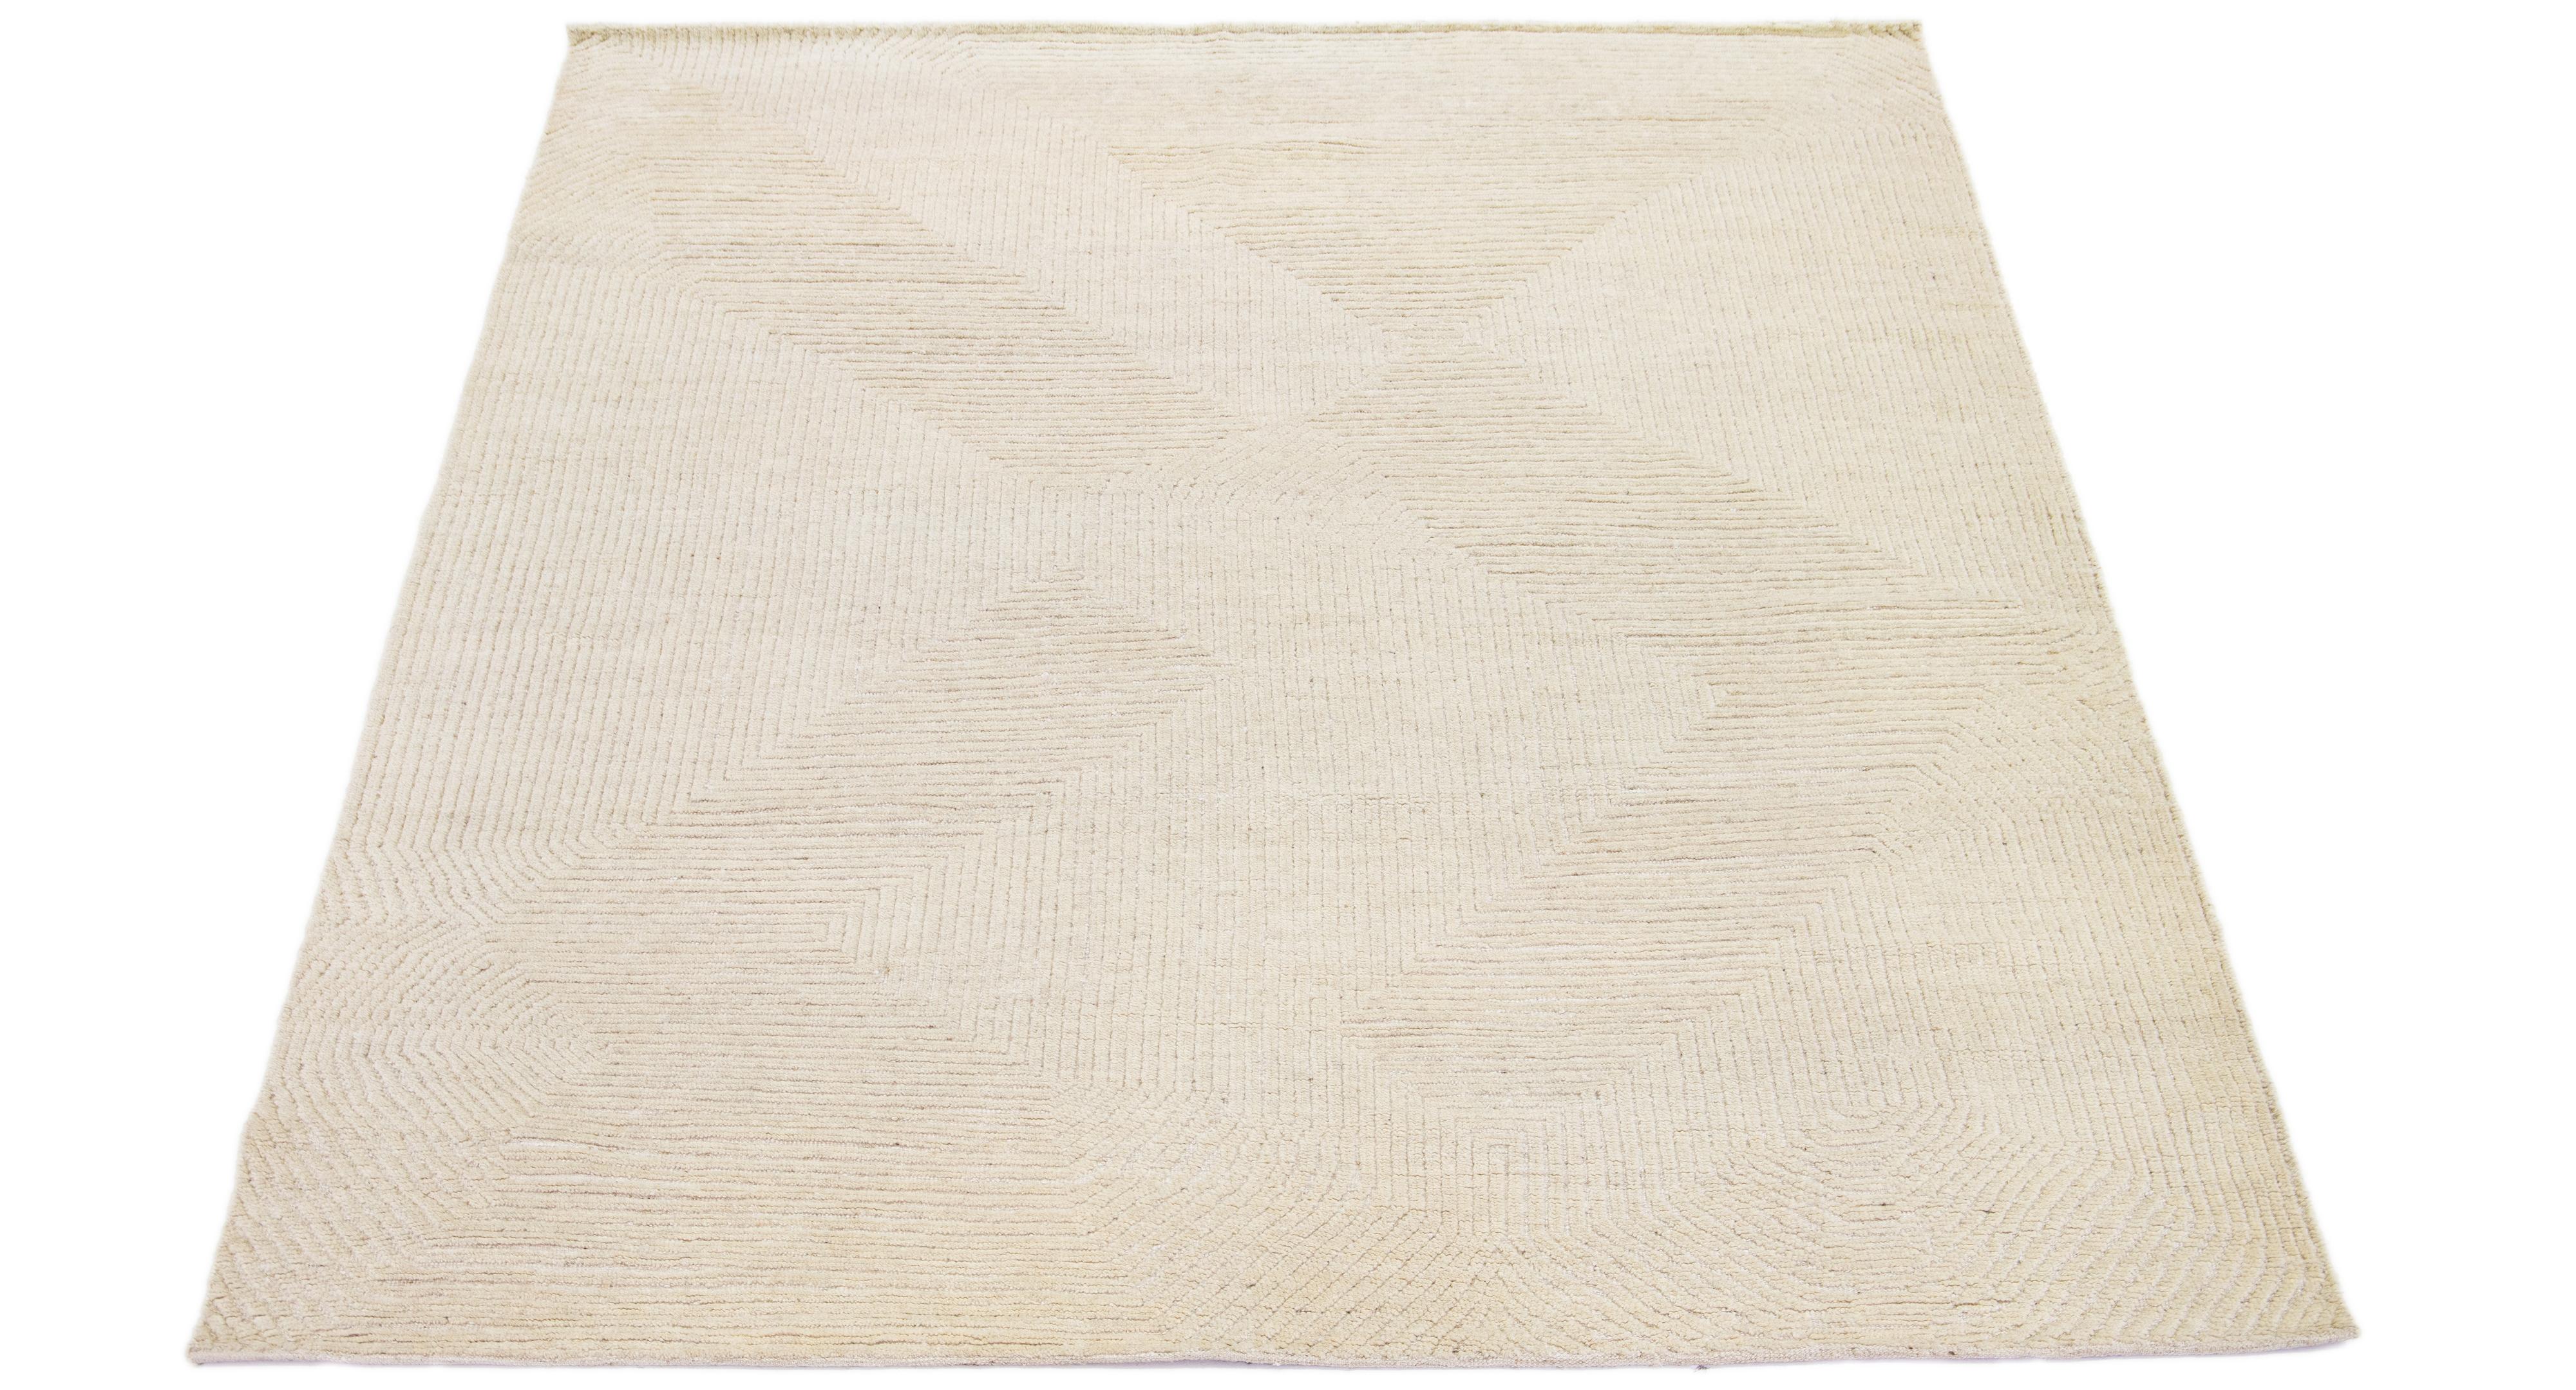 The wool rug, crafted with the hand-knotting technique, features a contemporary design inspired by Moroccan motifs. Its foundation boasts a natural beige shade that forms the backdrop of an appealing abstract geometric pattern.

This rug measures